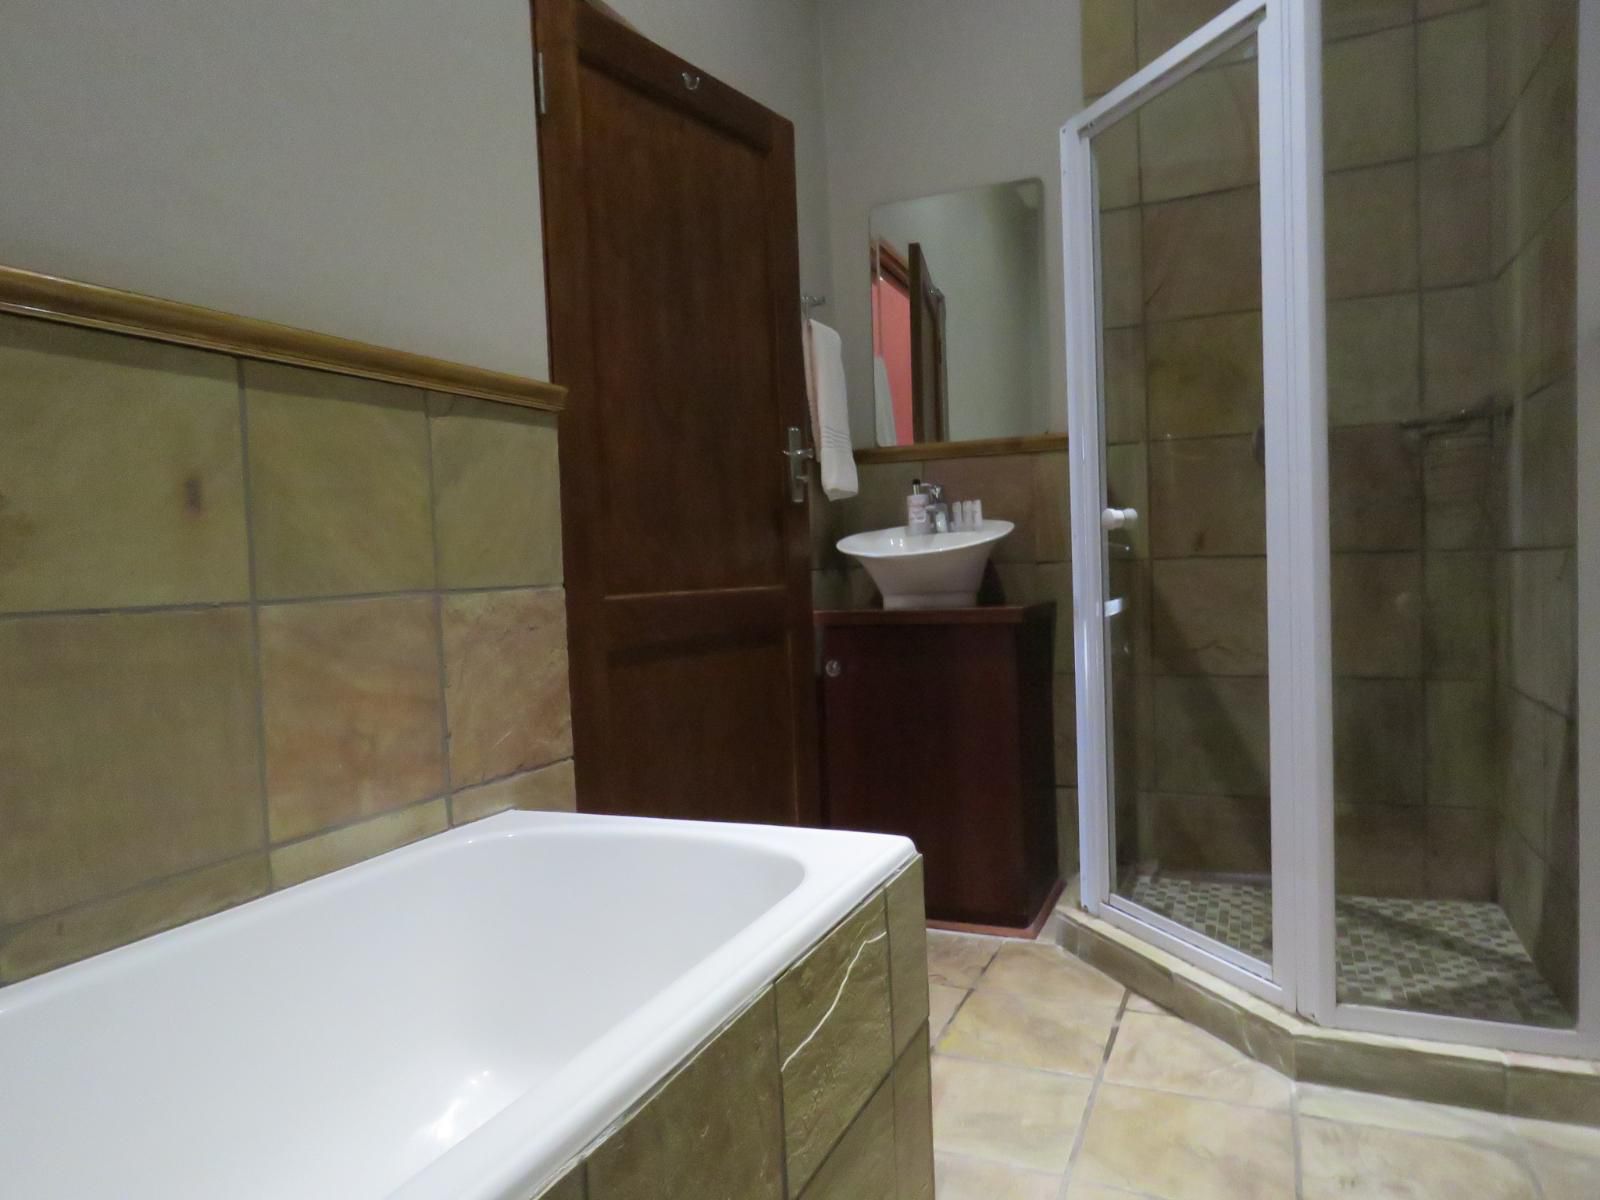 Abiento Guesthouse Park West Bloemfontein Free State South Africa Bathroom